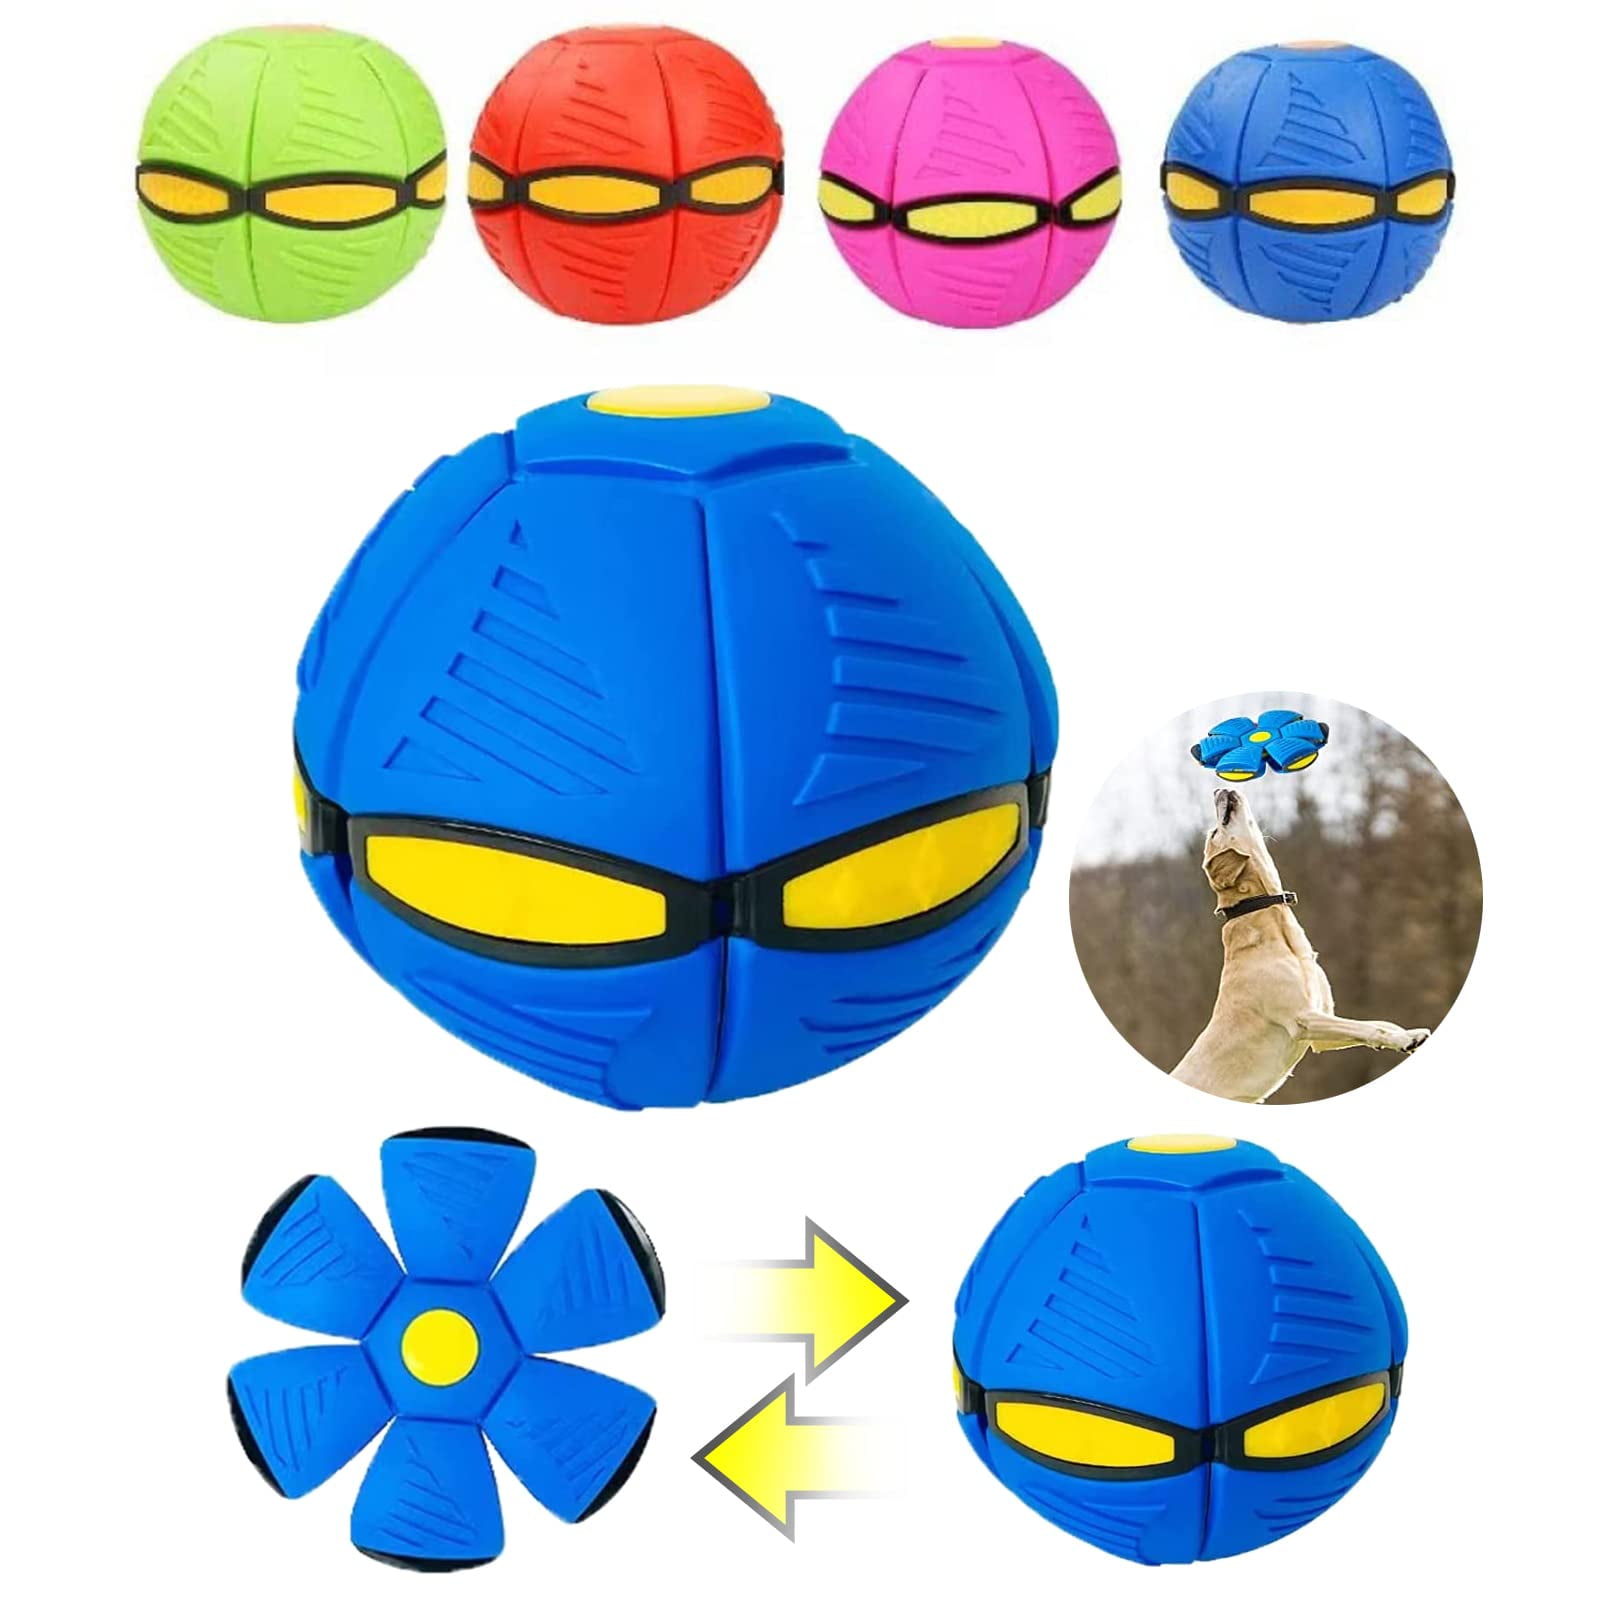 Fly To the Moon - Alien Snuffle Toy